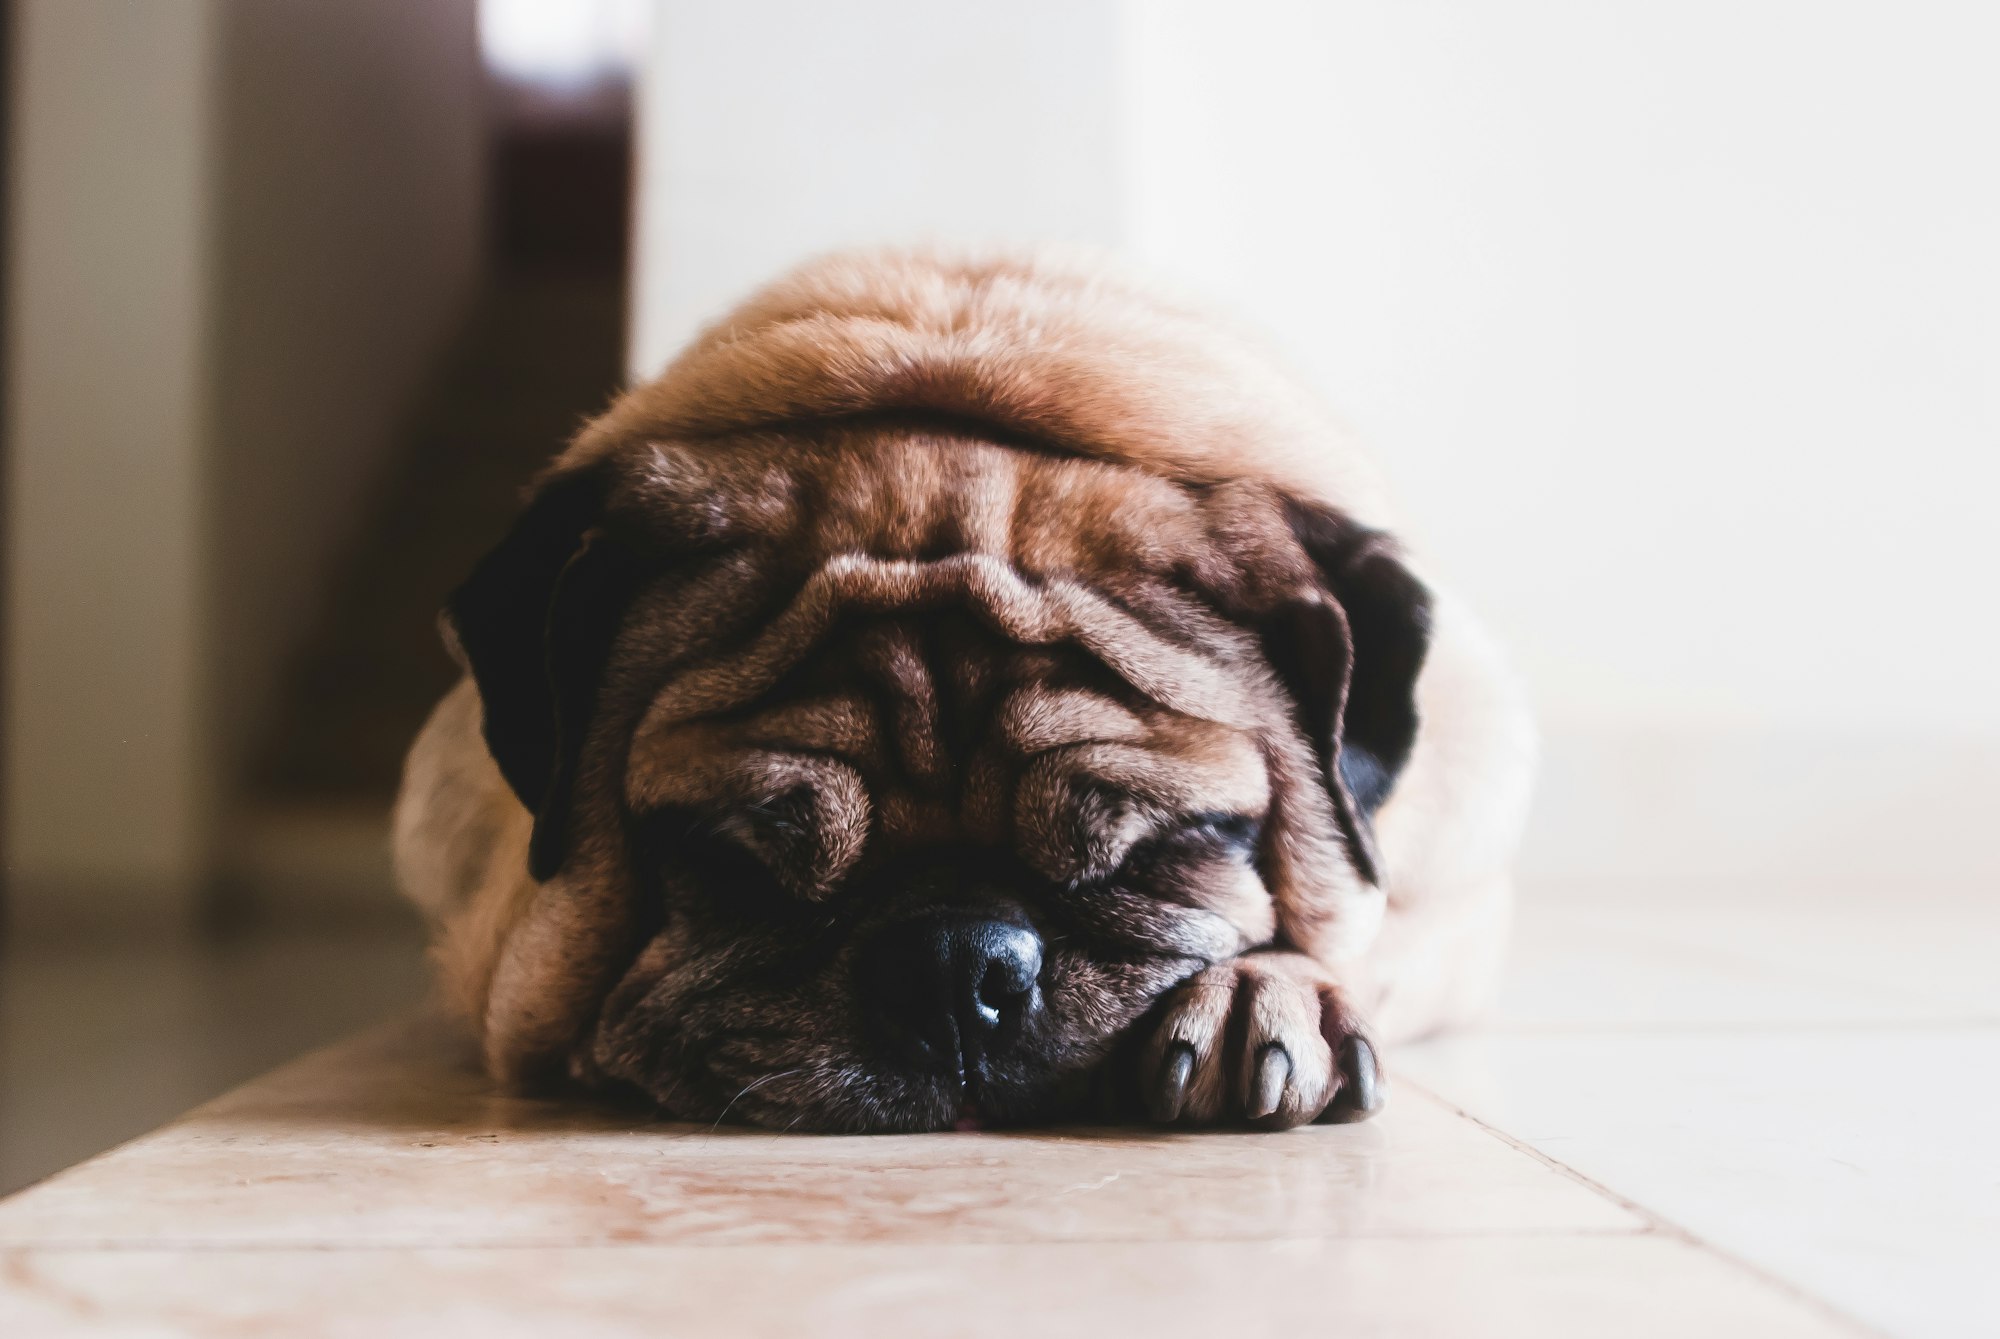 What Is Reverse Sneezing In Dogs? Causes, Treatment and More